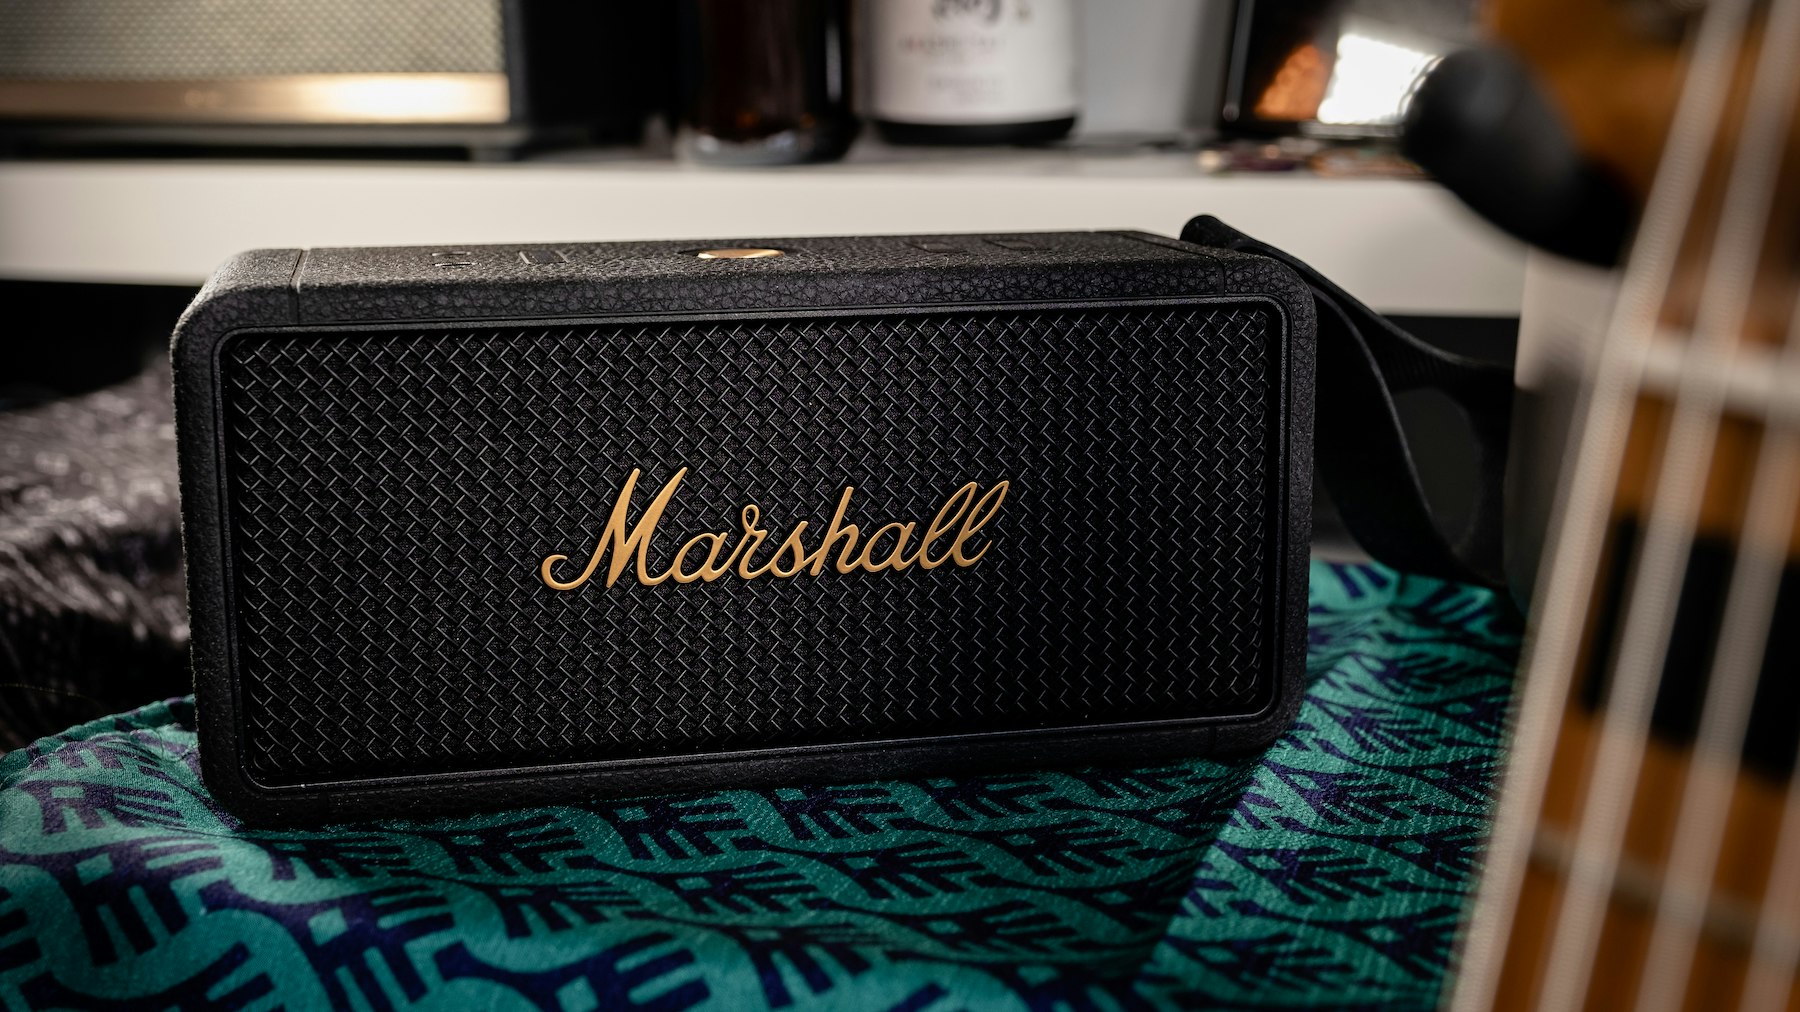 Marshall Acton II reviews: Looks & Sounds beautiful